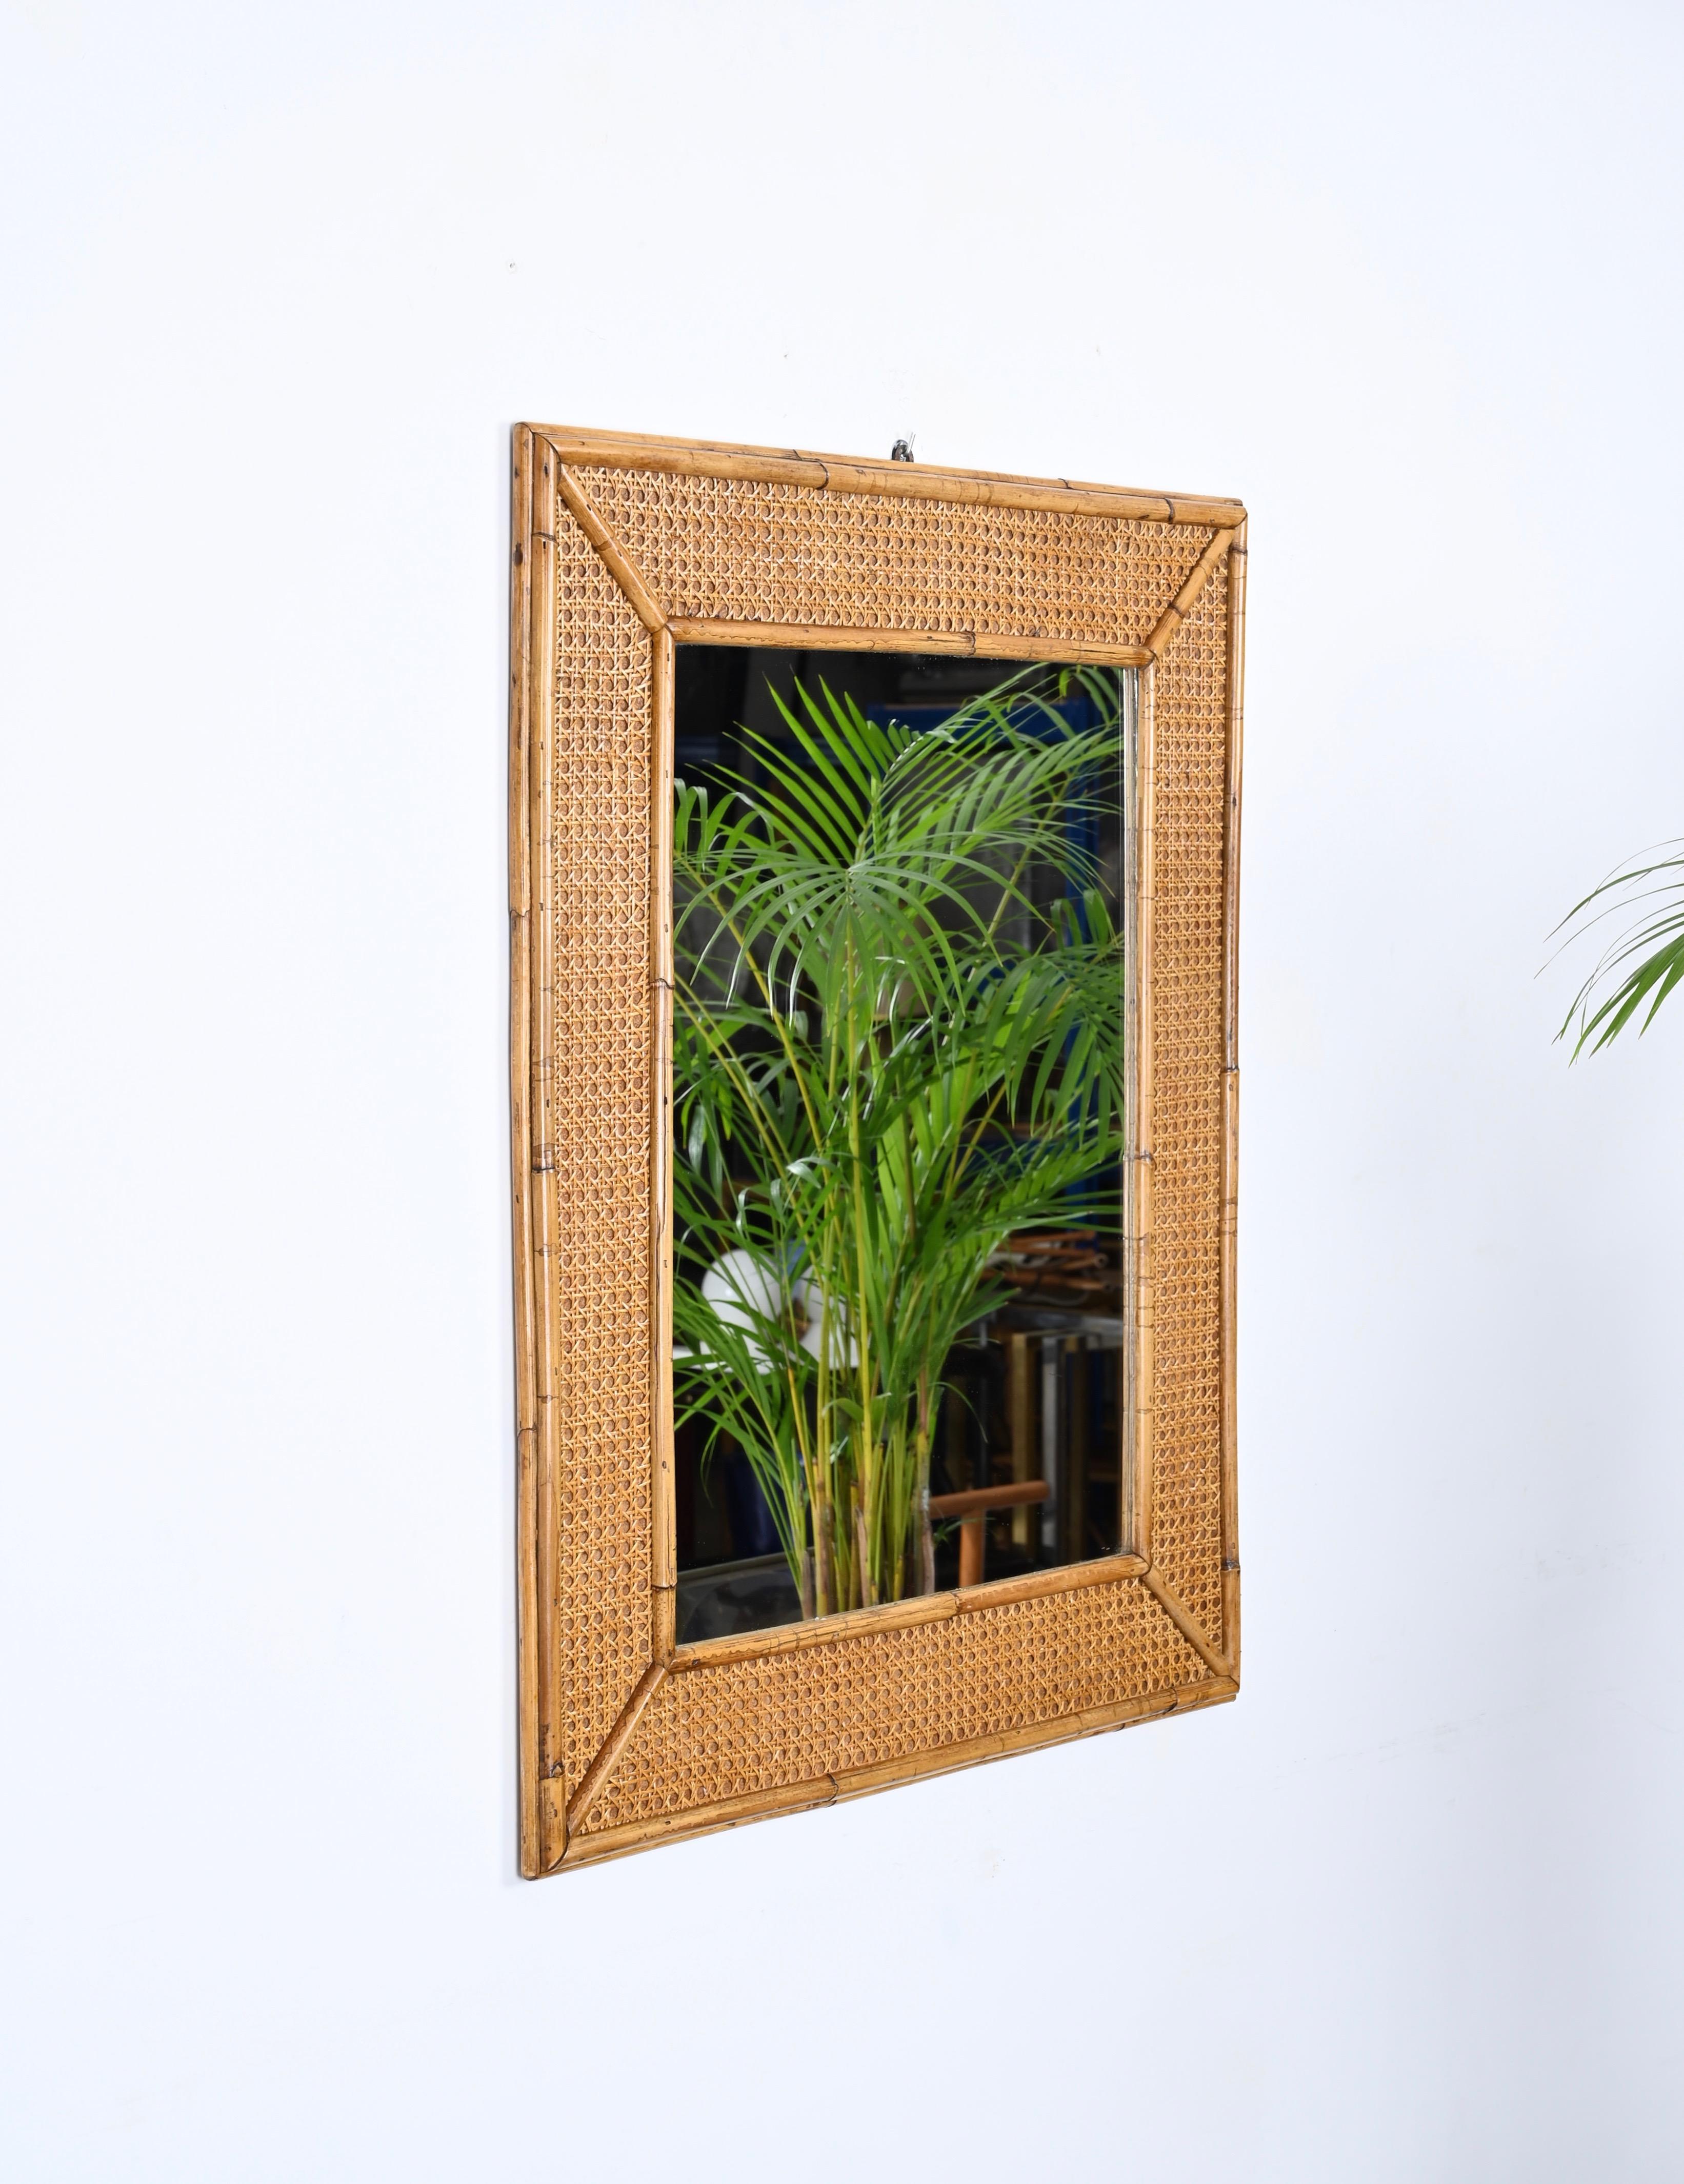 Spectacular midcentury rectangular mirror in bamboo and hand-woven wicker. This outstanding item was produced in Italy during the 1970s.

This large mirror is incredible thanks to its complex frame: it has an internal part made of a single bamboo